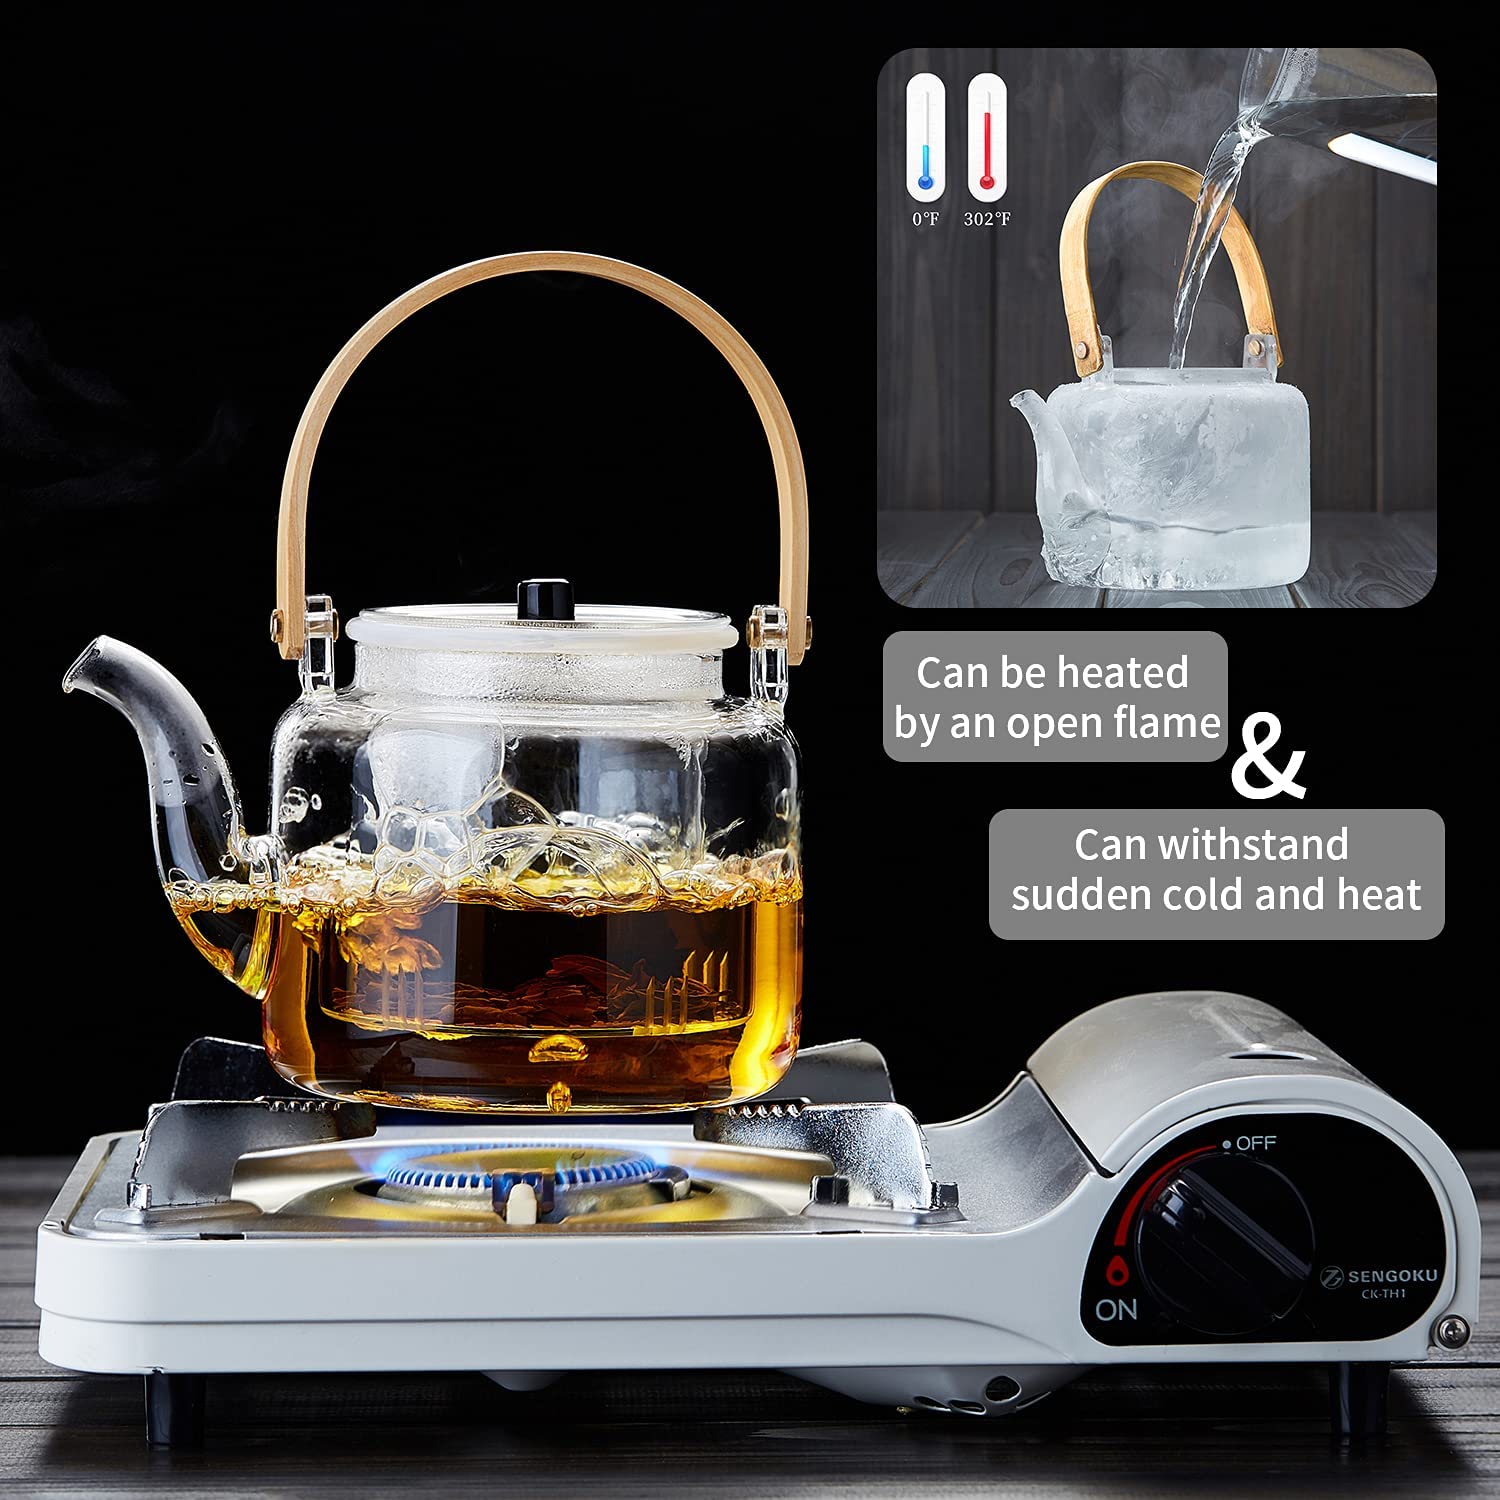 Glass Teapot,1000ml/34oz Borosilicate Glass Teapot with Removable Infuser, Stovetop Safe Tea Kettle,Blooming and Loose Leaf Tea Maker